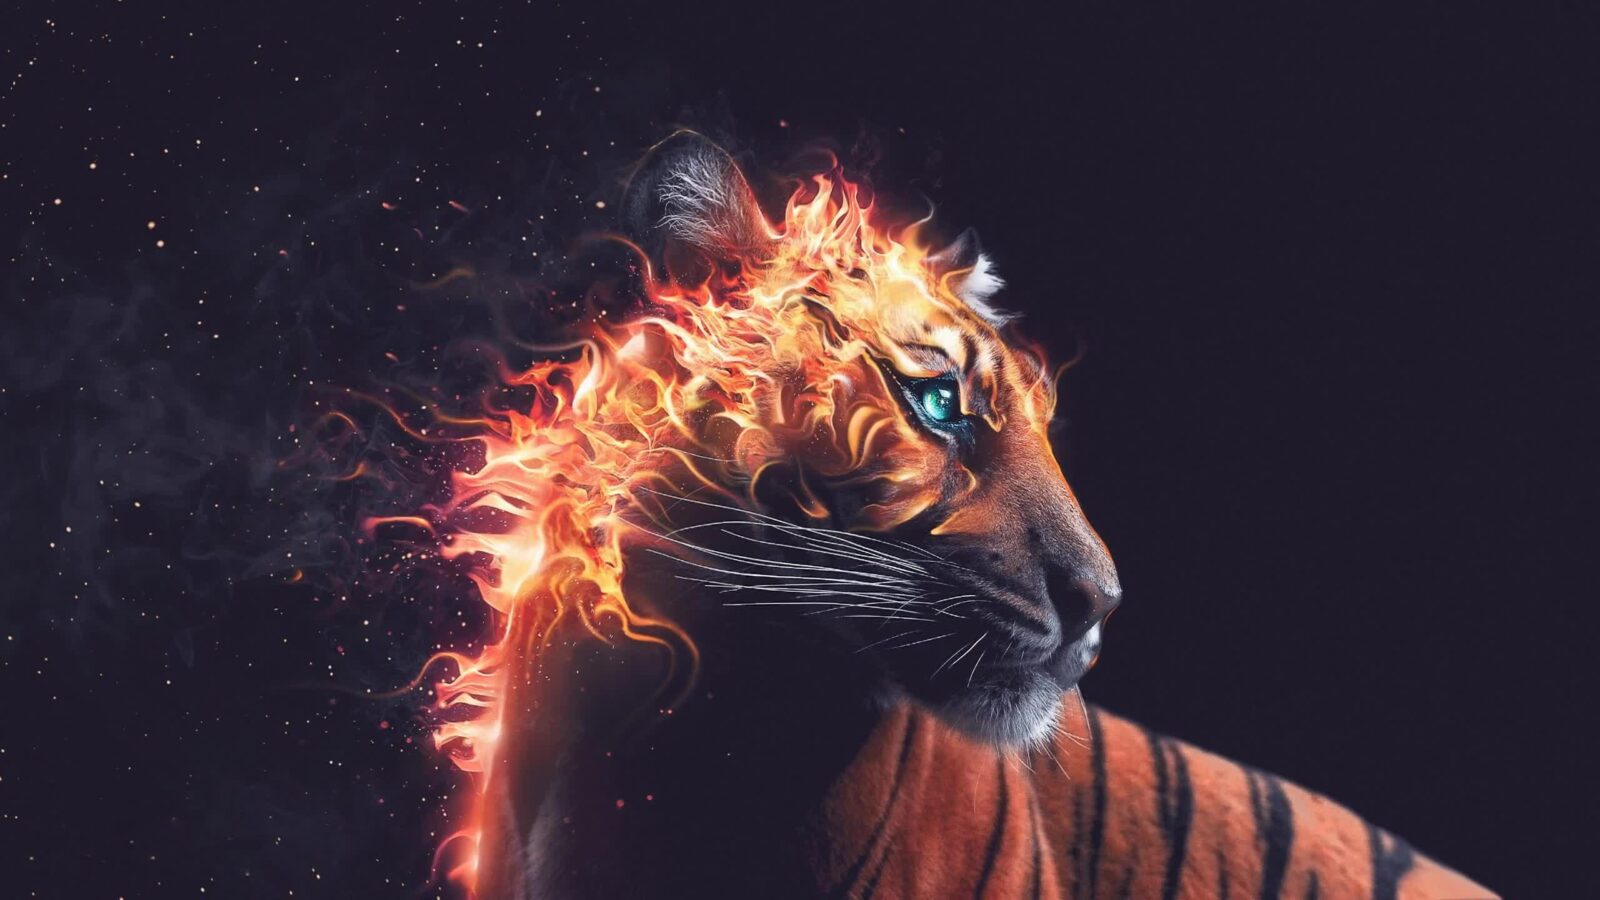 LiveWallpapers4Free.com | Enchanted Tiger In Flame - Free Live Wallpaper